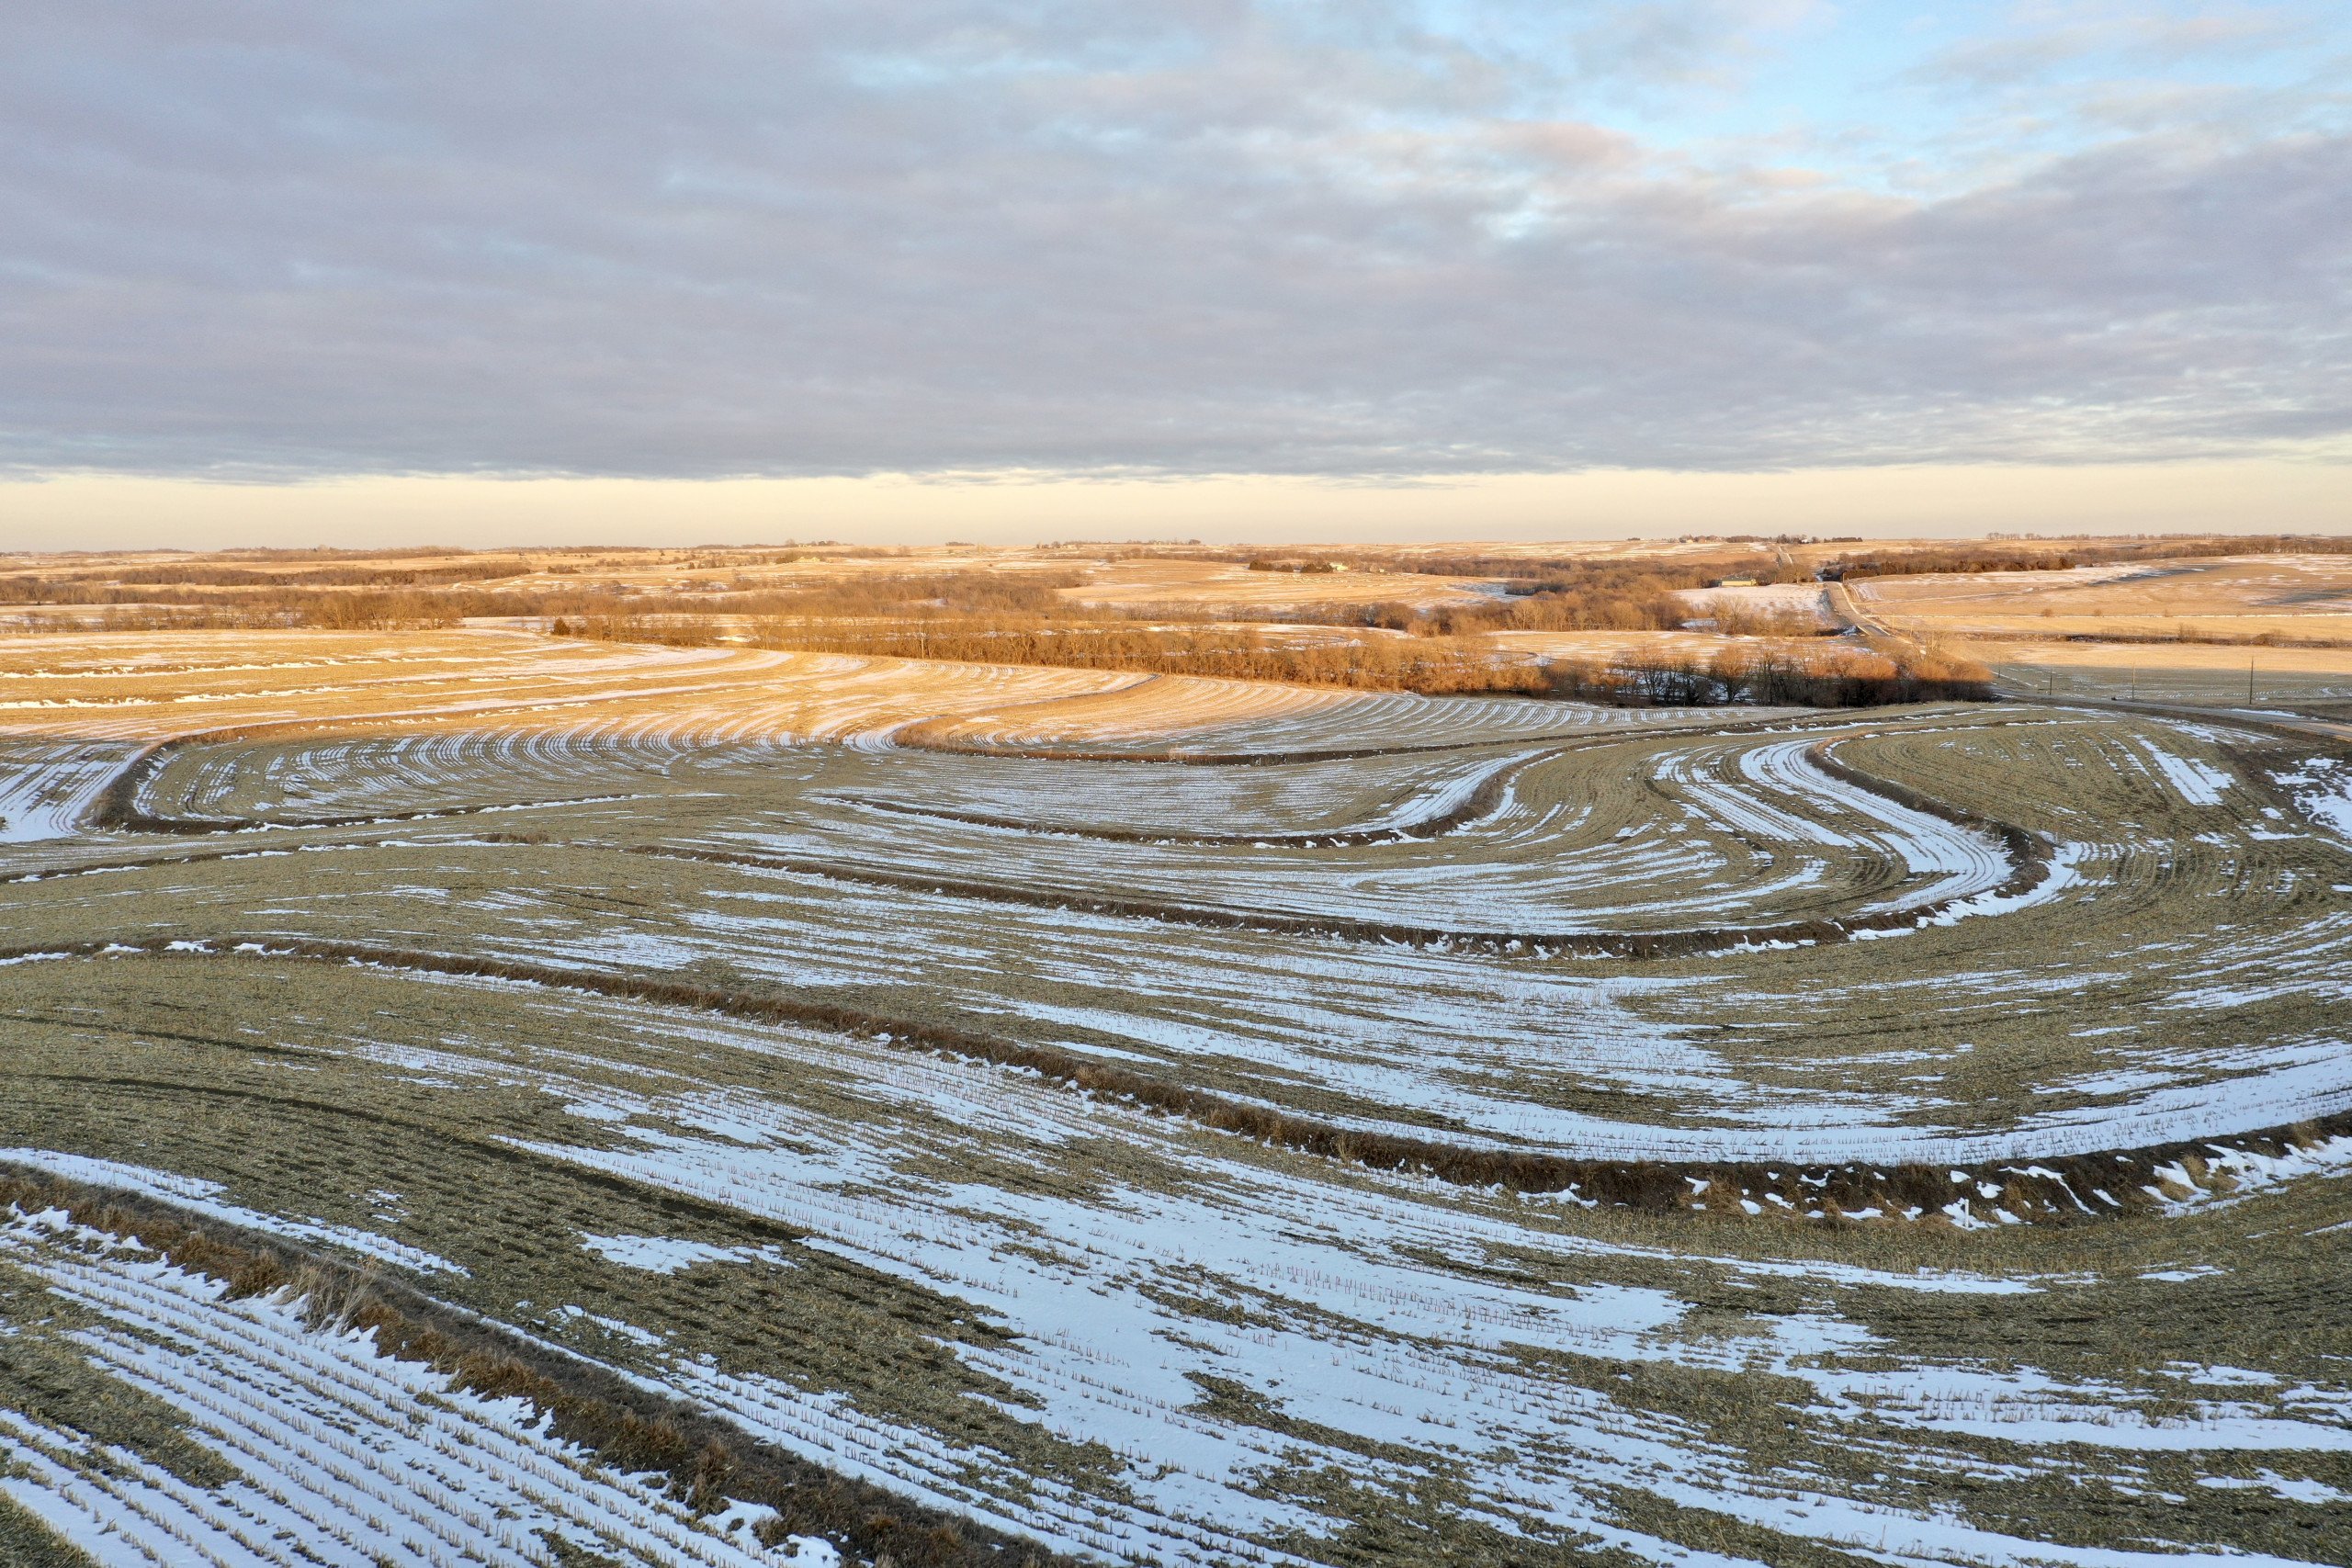 auctions-land-page-county-iowa-77-acres-listing-number-16010-DJI_0156-1.jpg